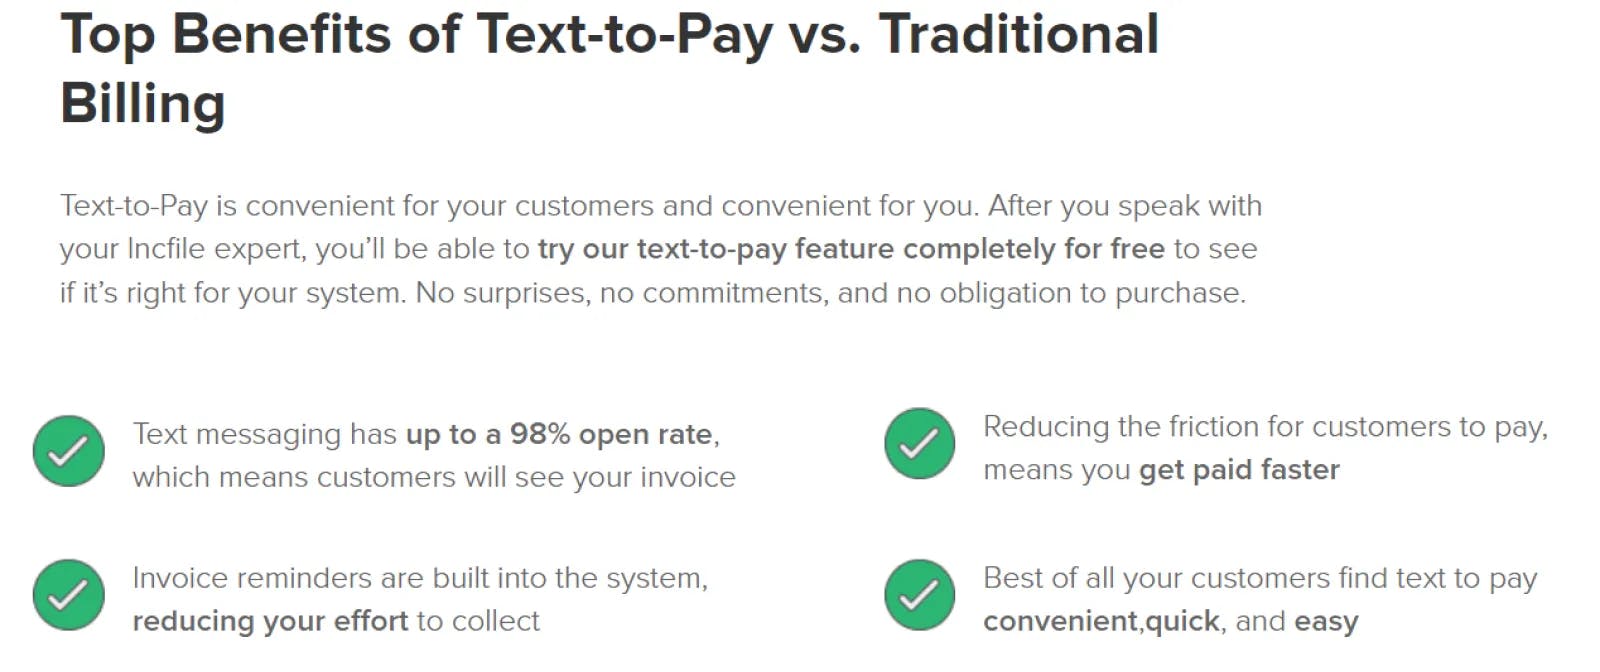 Top benefits of text-to-pay vs traditional billing